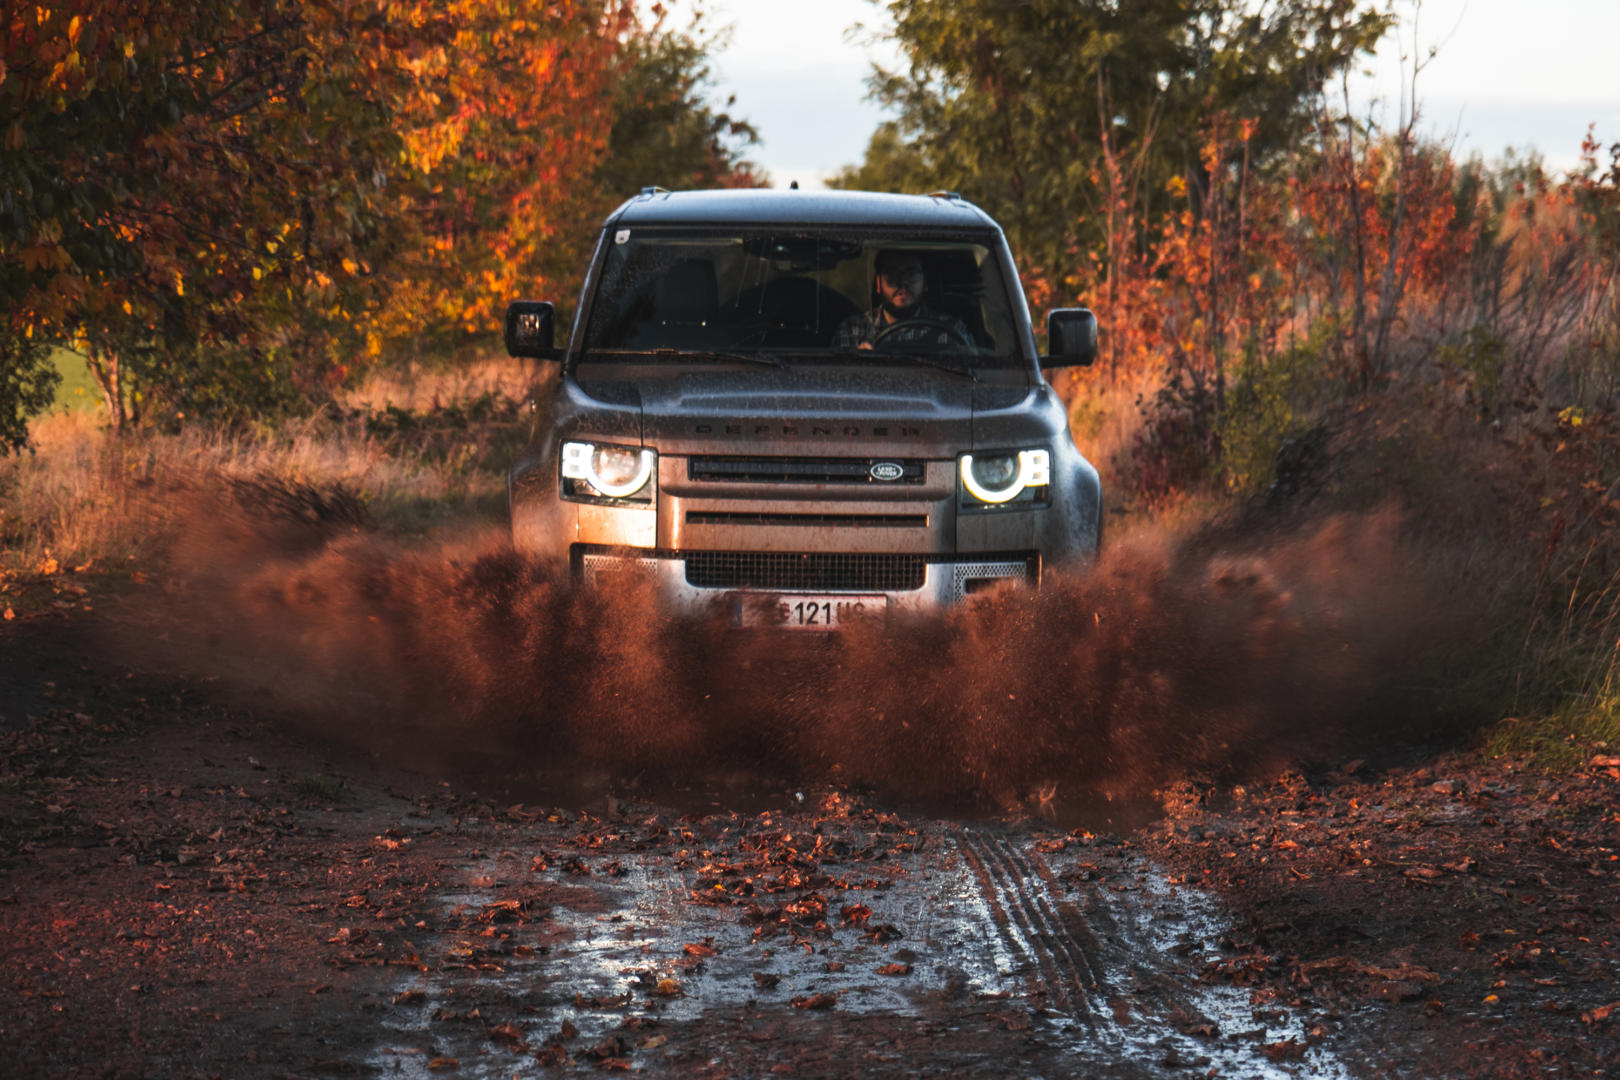 2020 Land Rover Defender 110 P400 AWD SE test review